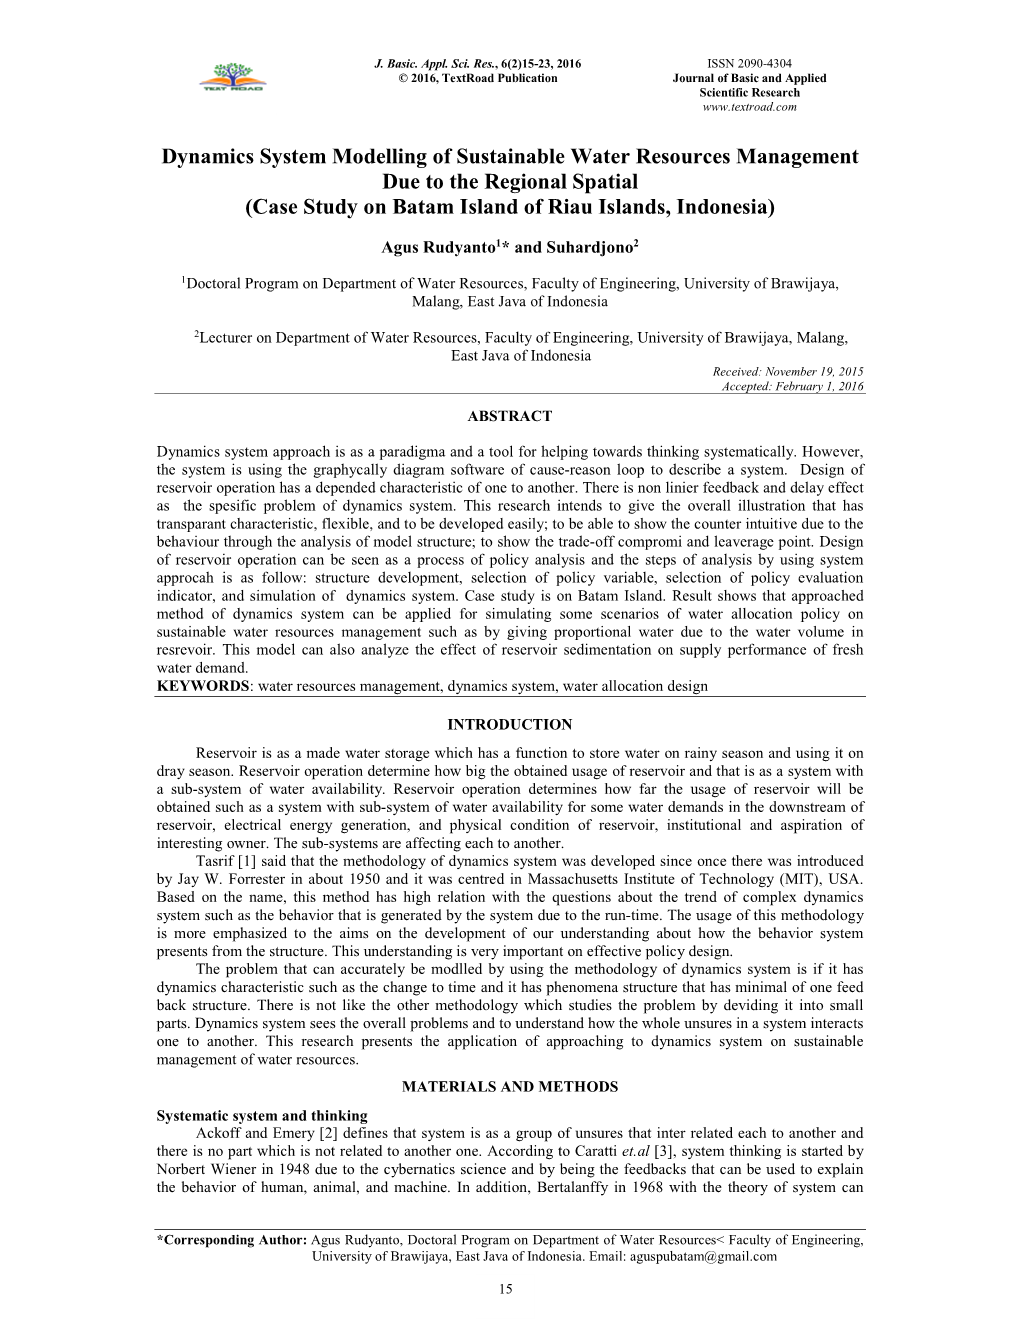 Dynamics System Modelling of Sustainable Water Resources Management Due to the Regional Spatial (Case Study on Batam Island of Riau Islands, Indonesia)